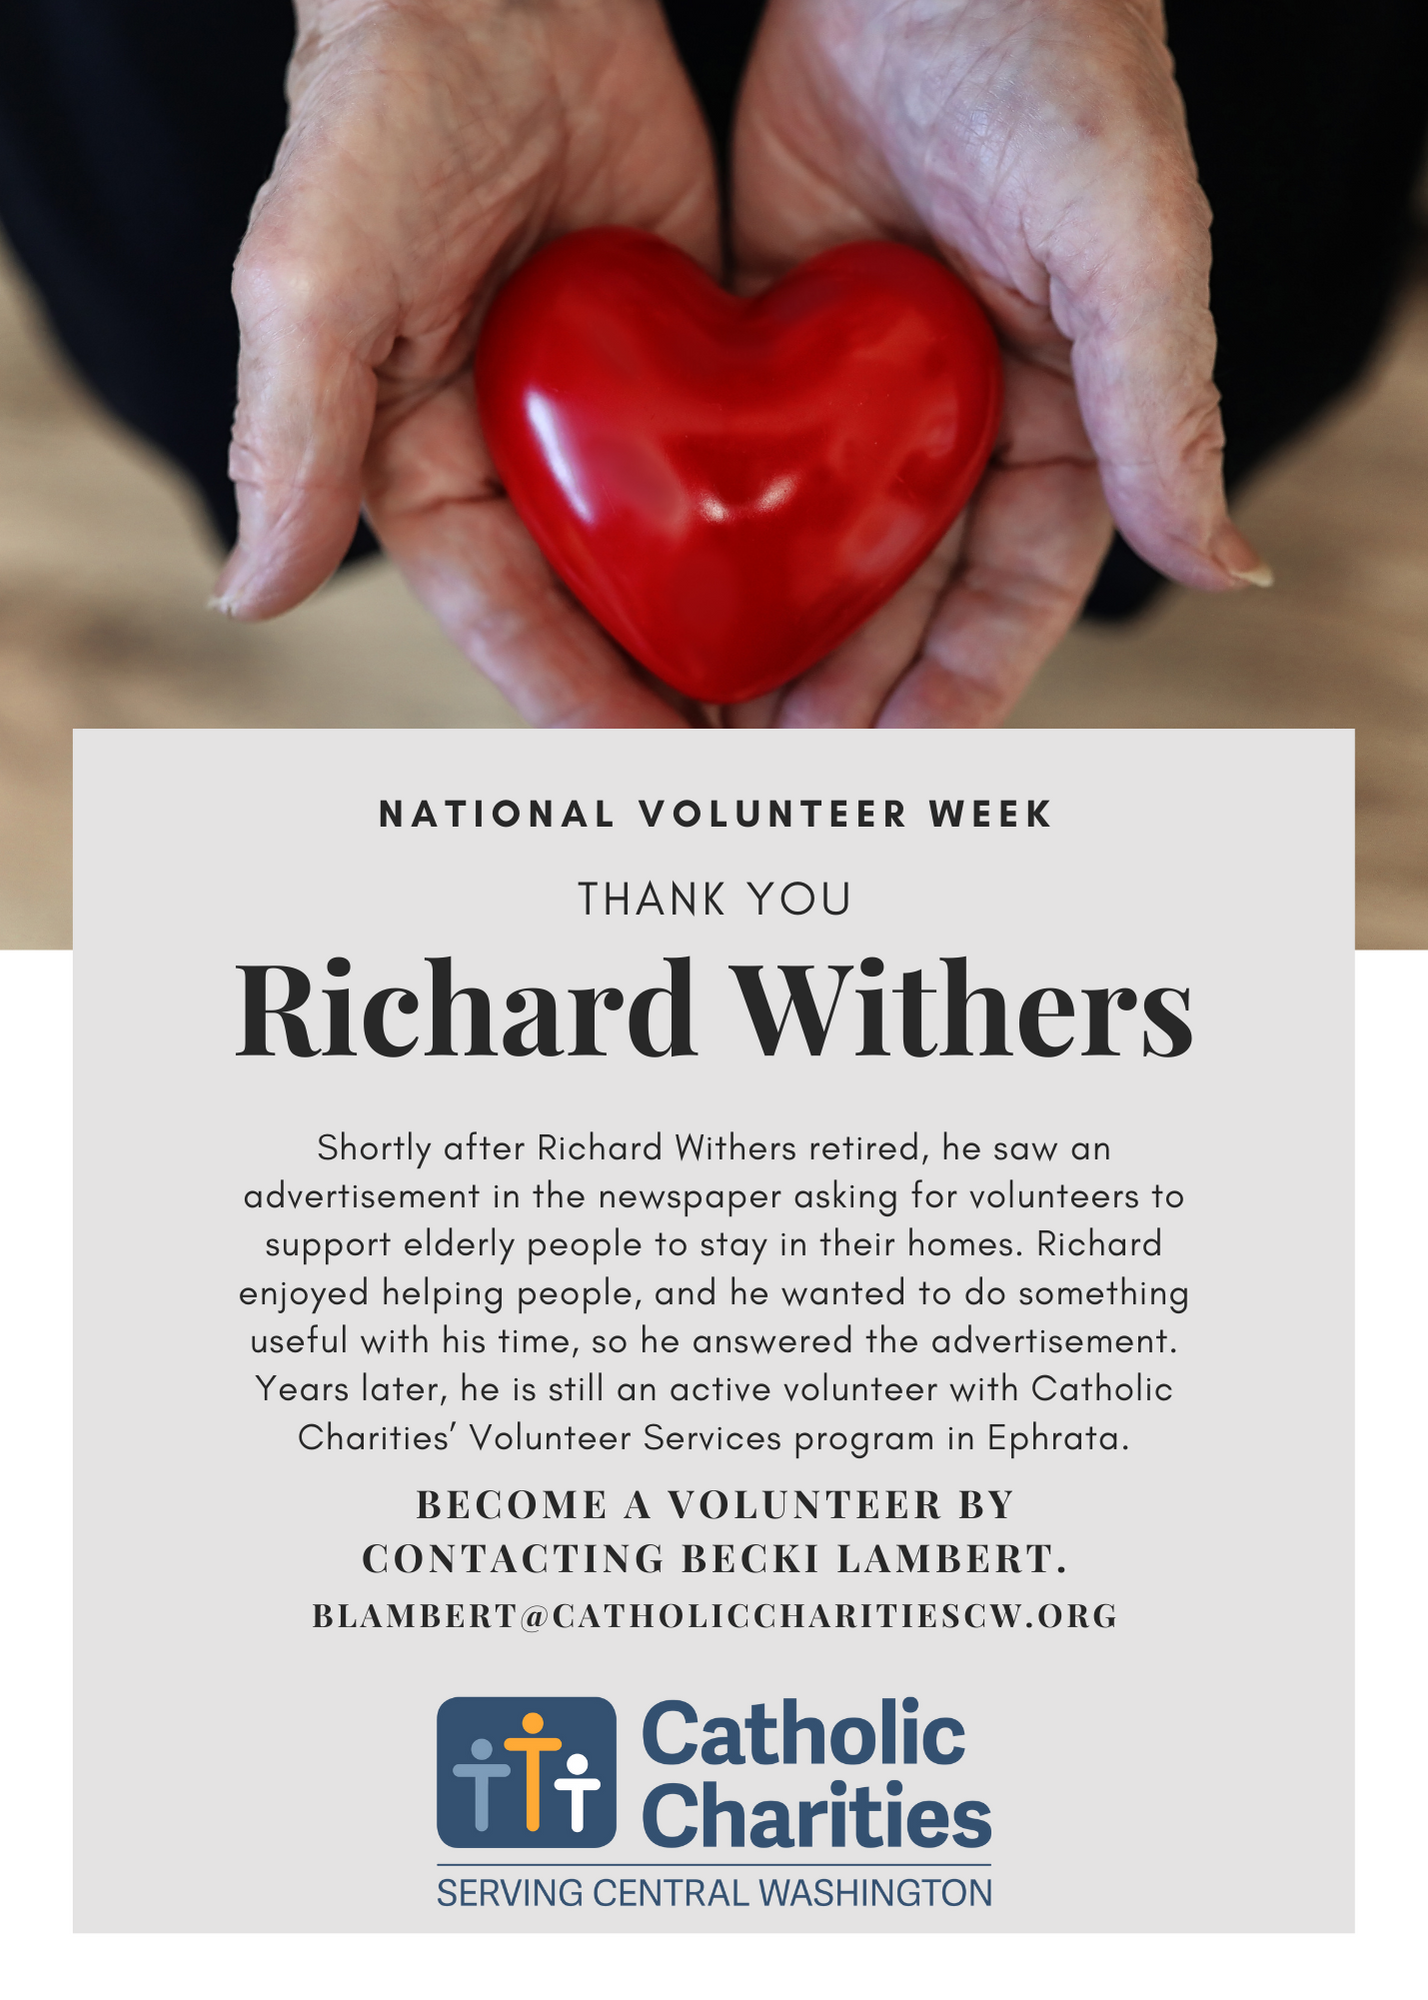 NVW: Richard Withers